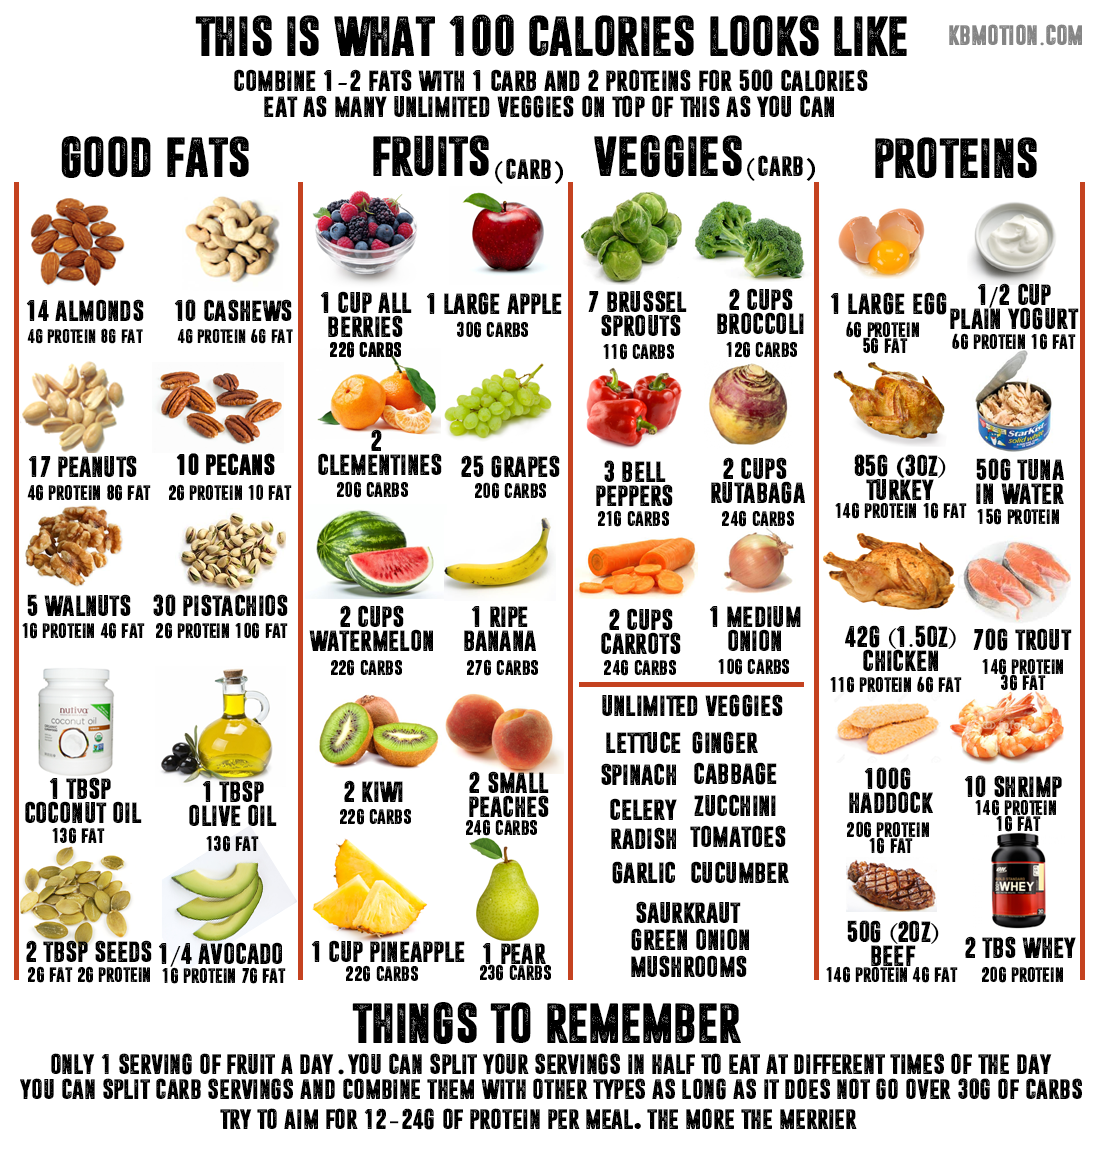 This is what 100 calories look like. I've made this food chart for 